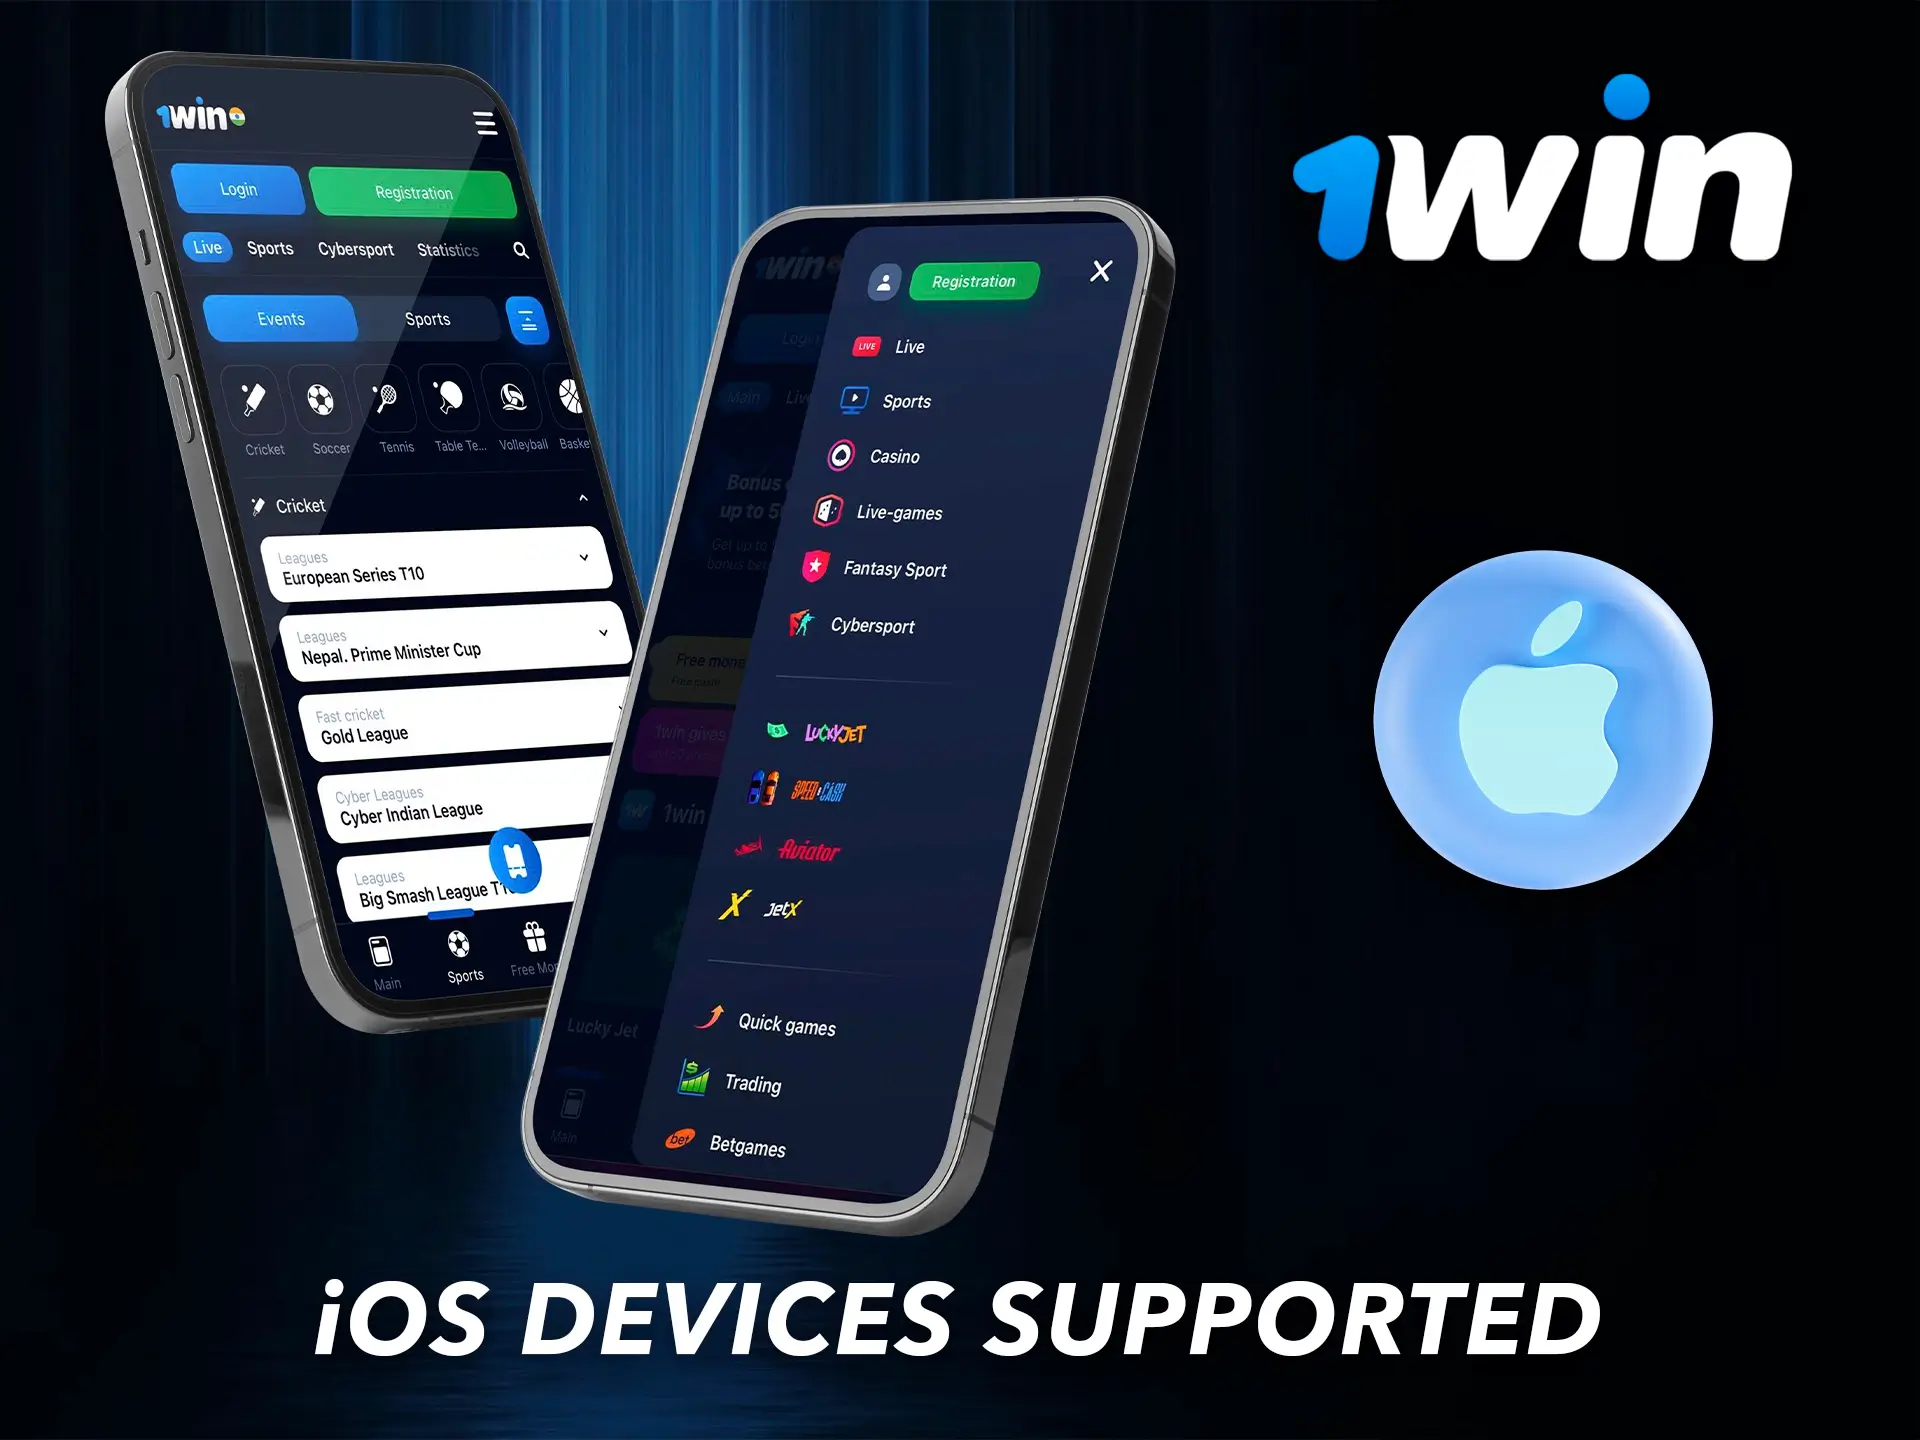 The 1Win app gives out high performance on apple devices.